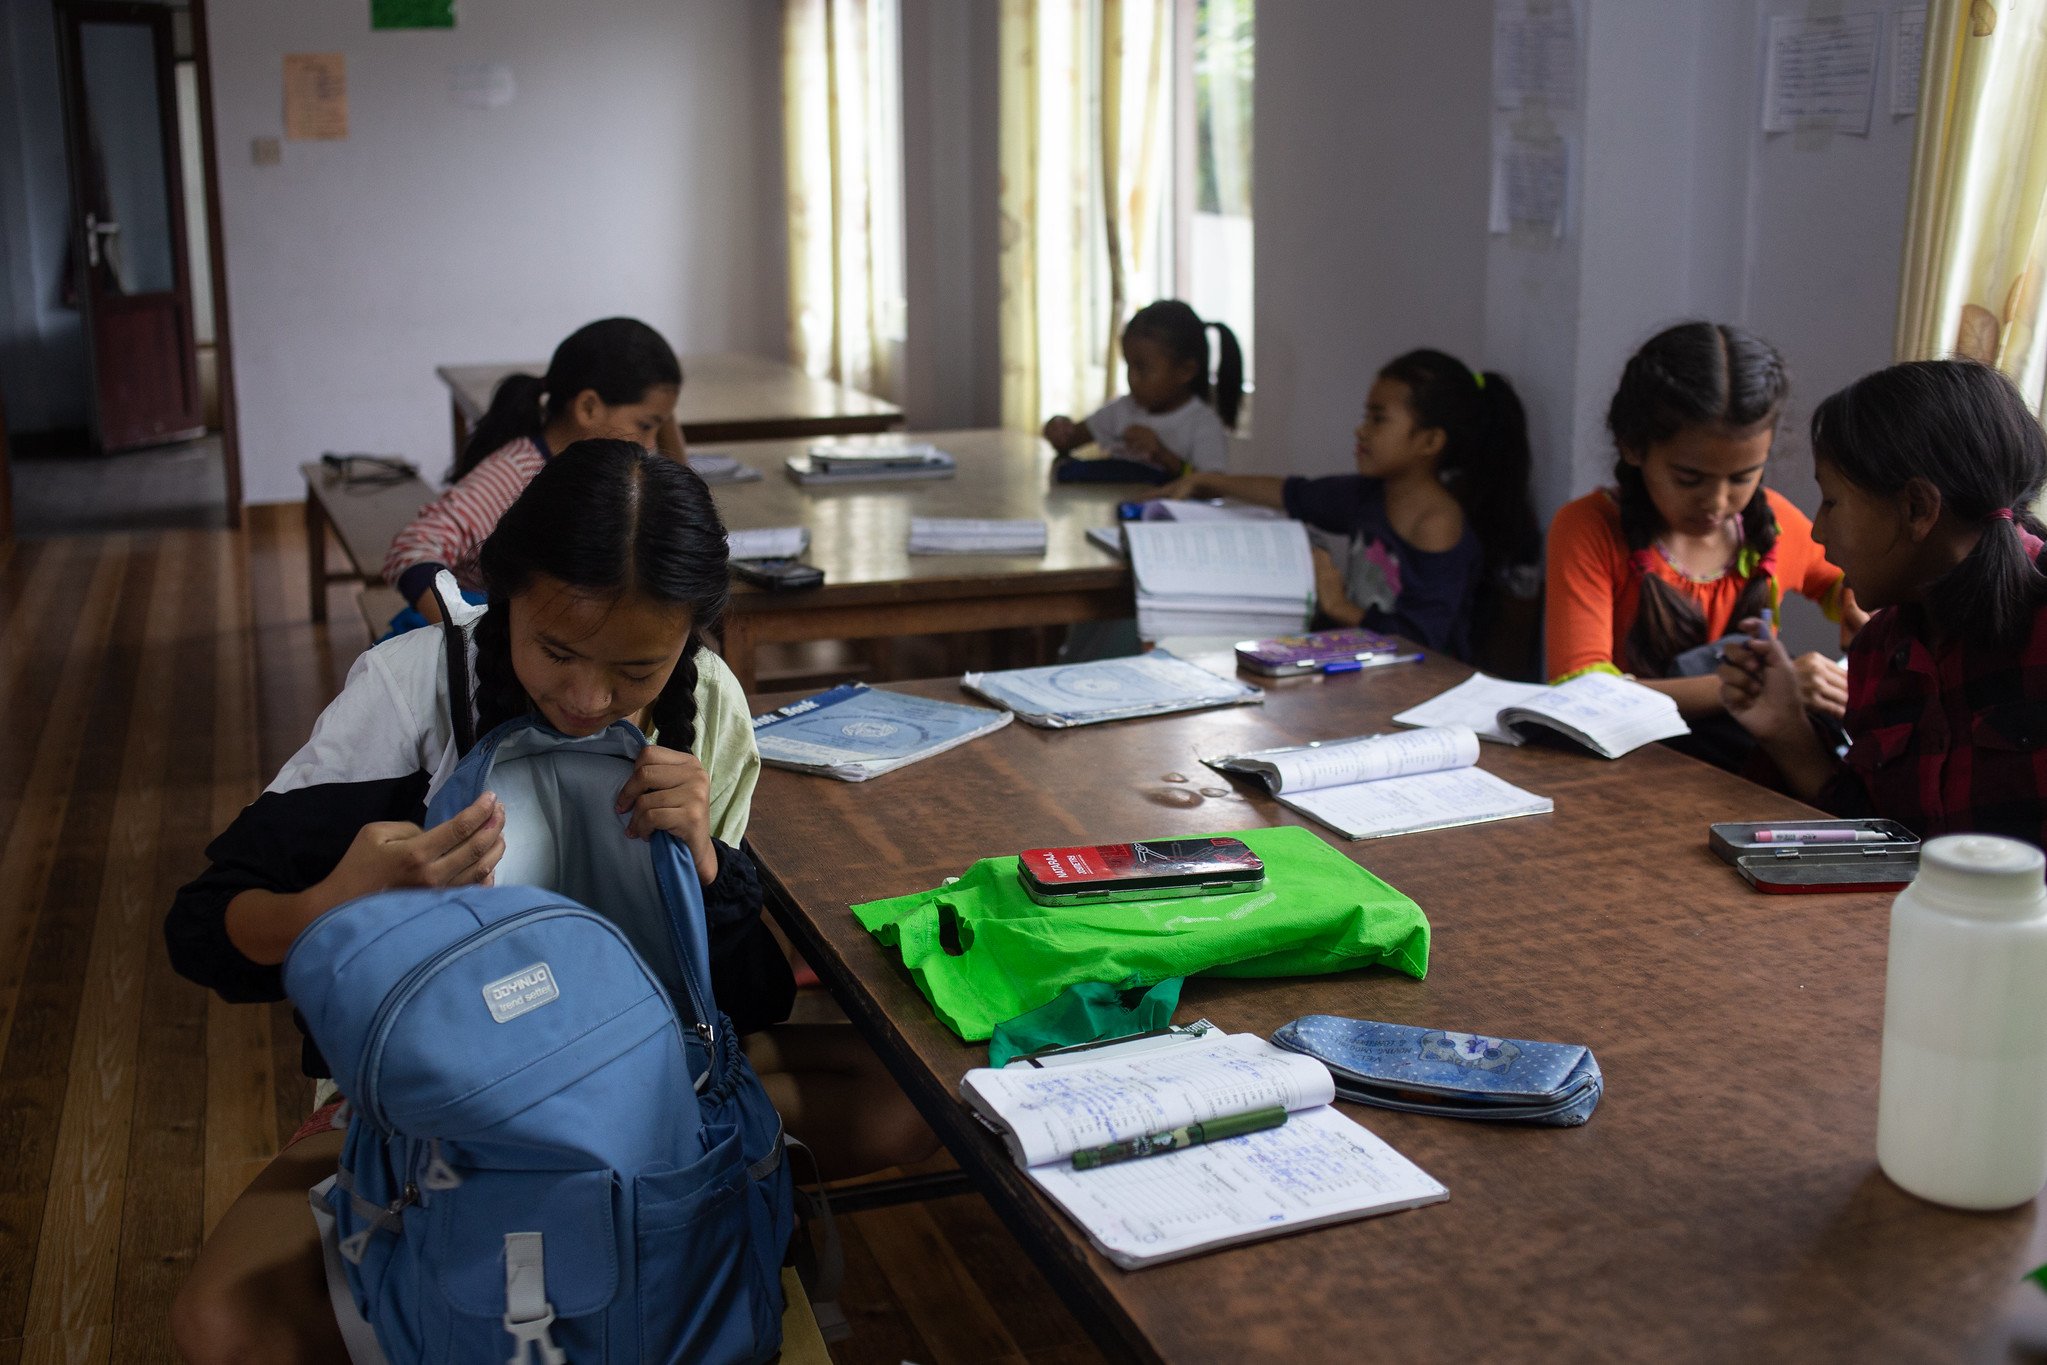  Girls do their homework together in the study room at their hostel in Kathmandu. (Photo by Uma Bista) 